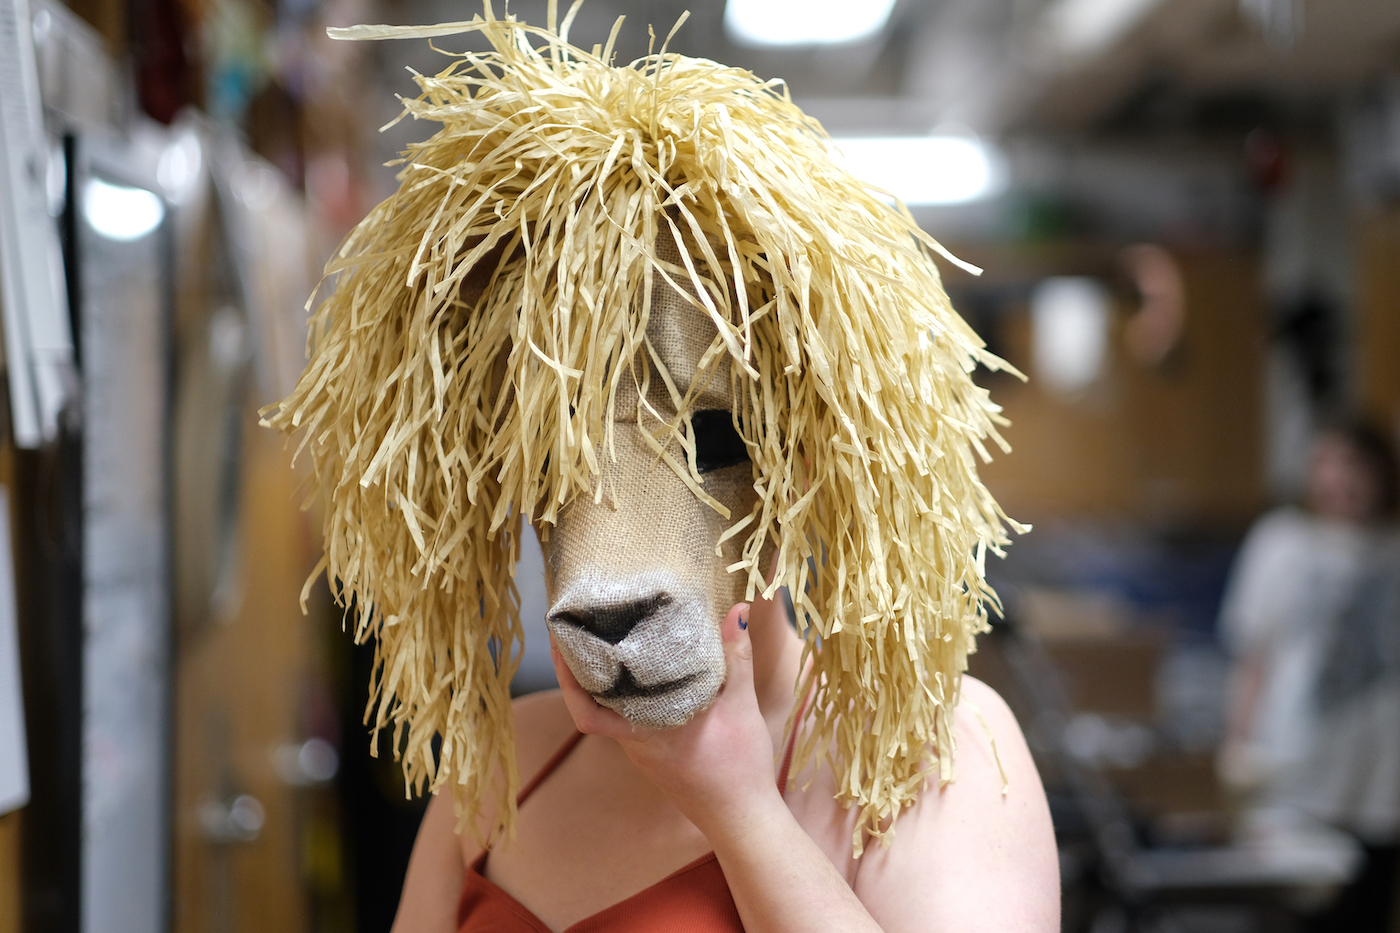 A student wears an animal mask in preparation for "Alcina."